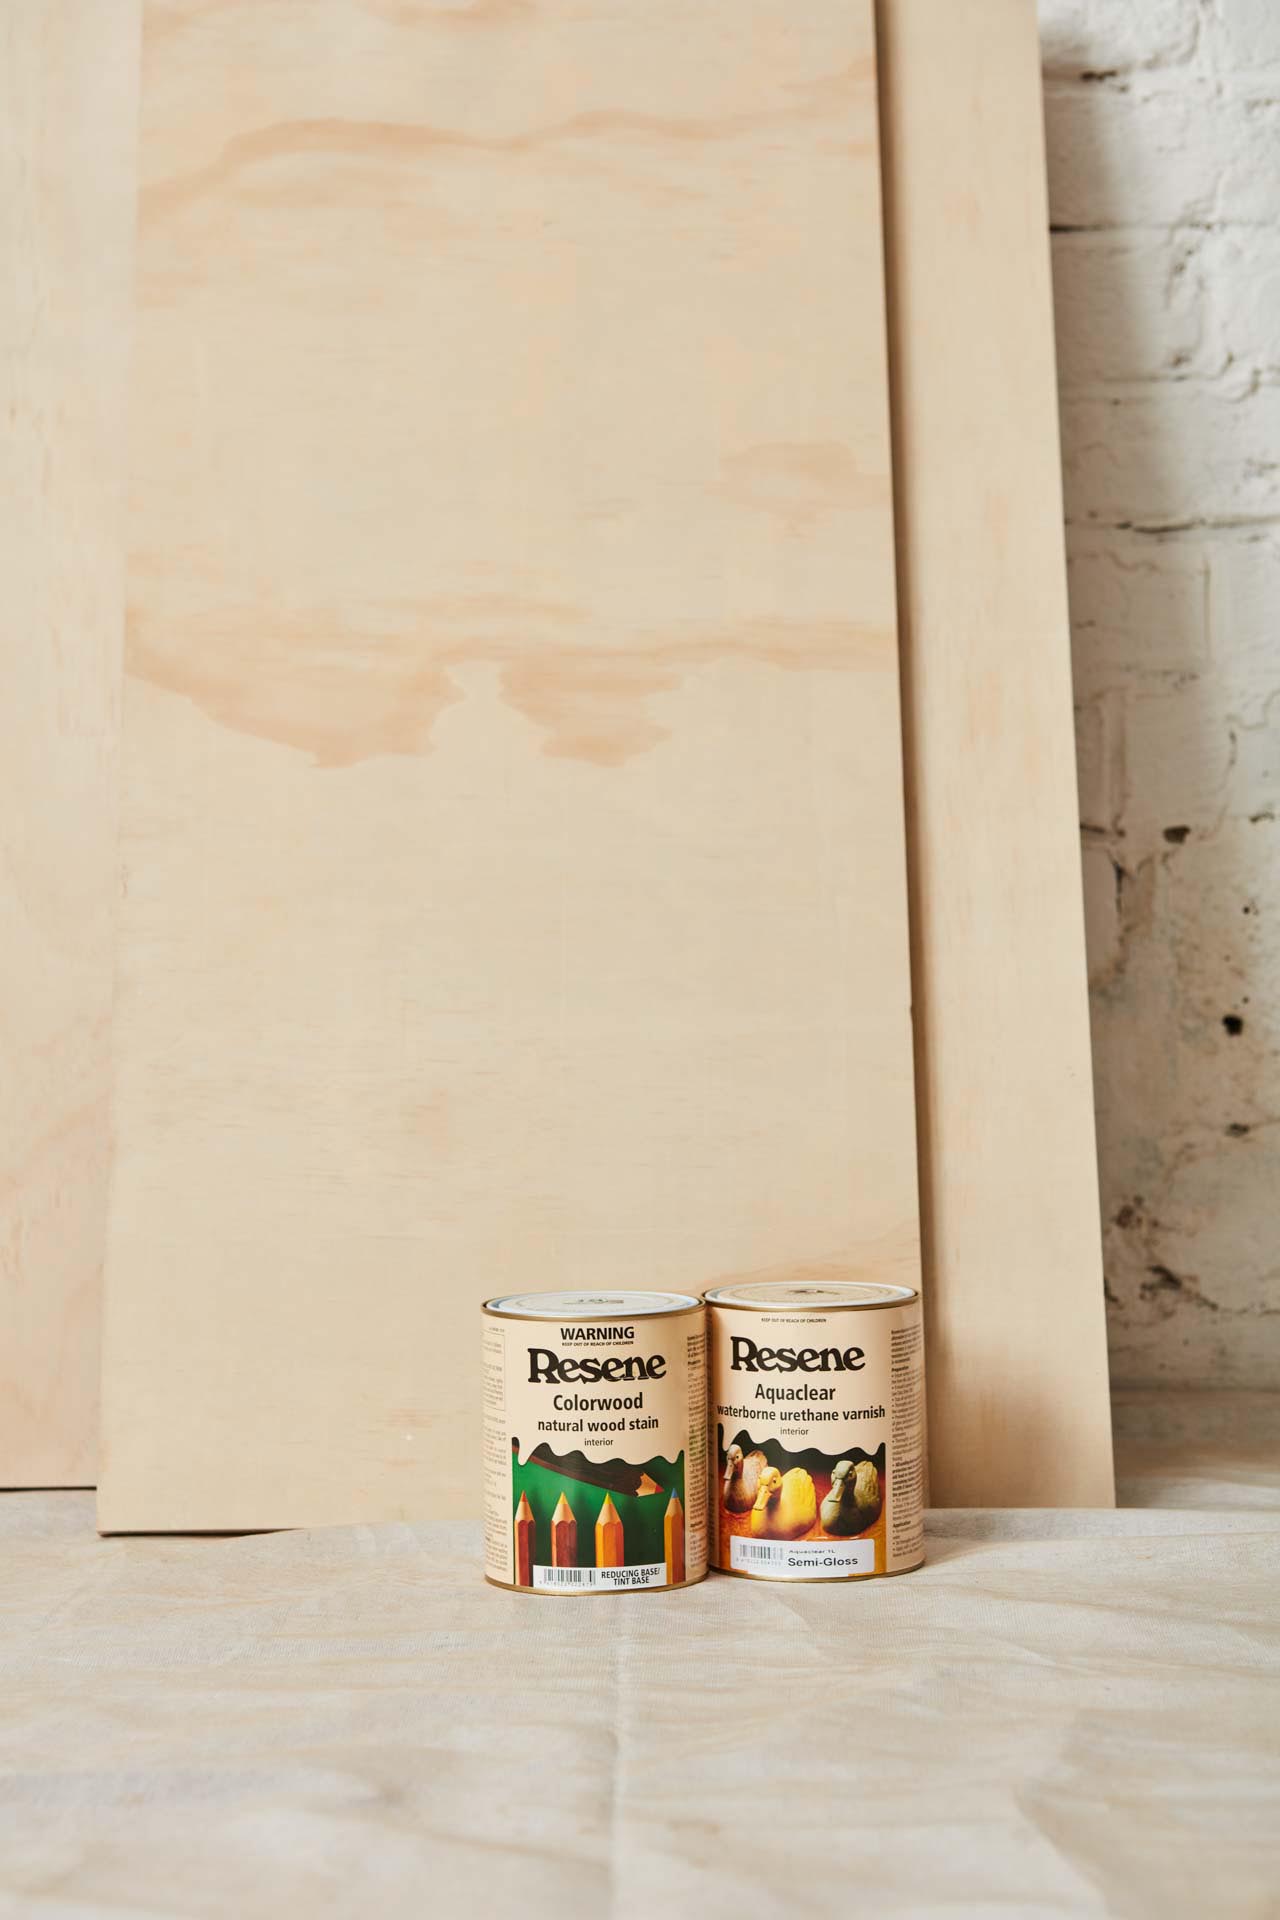 Two sheets of plywood leaning against the wall with buckets of Resene wood stain on the floor